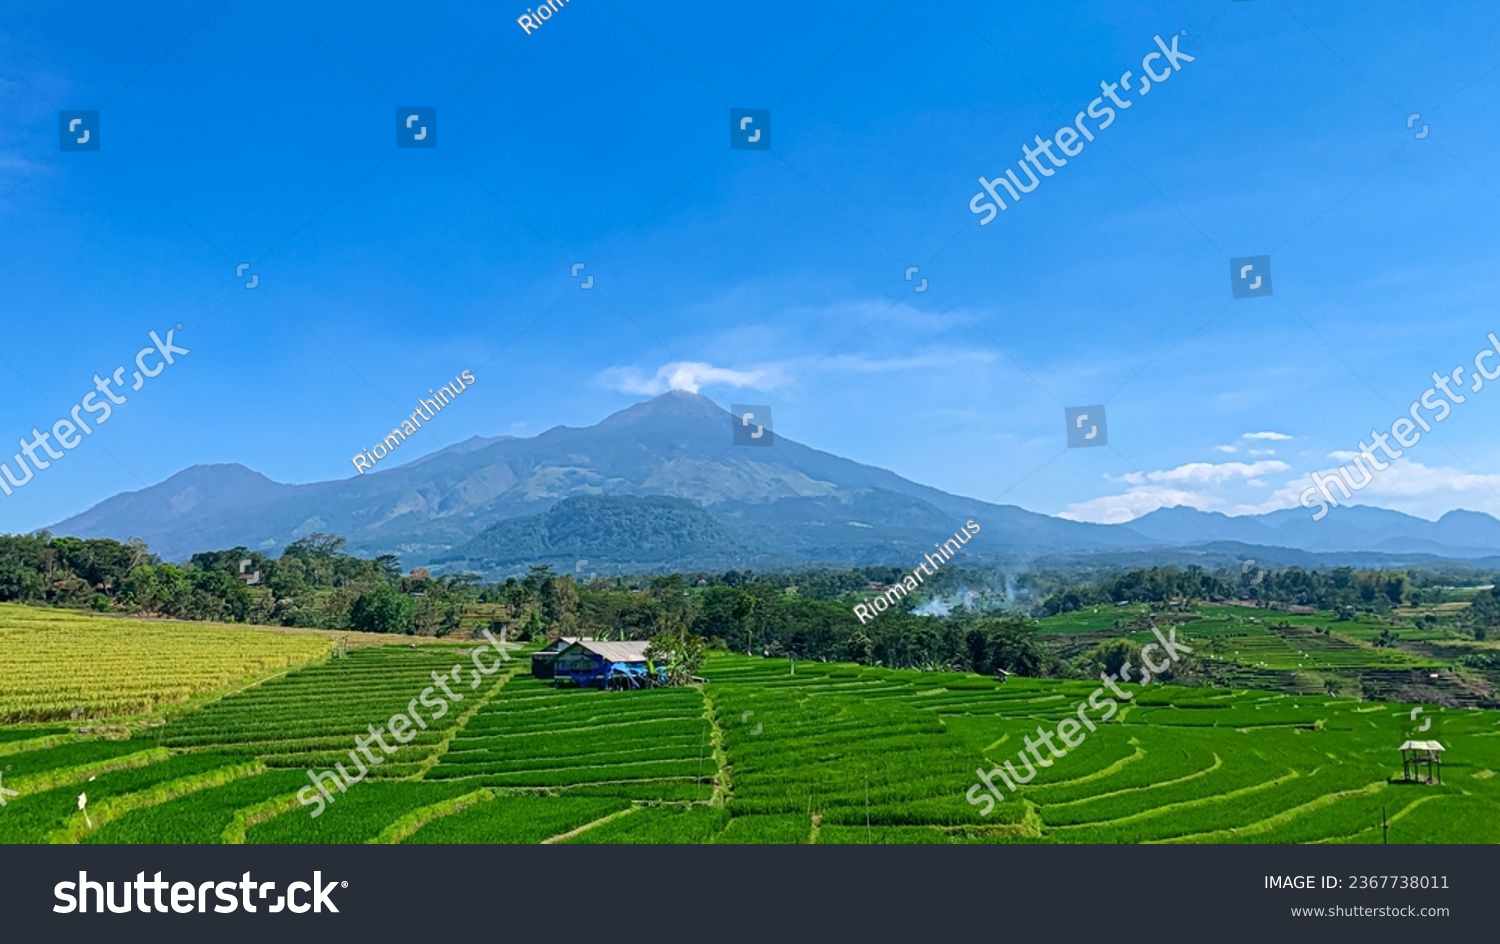 View of rice field and mountains at mojokerto, east java, indonesia #2367738011